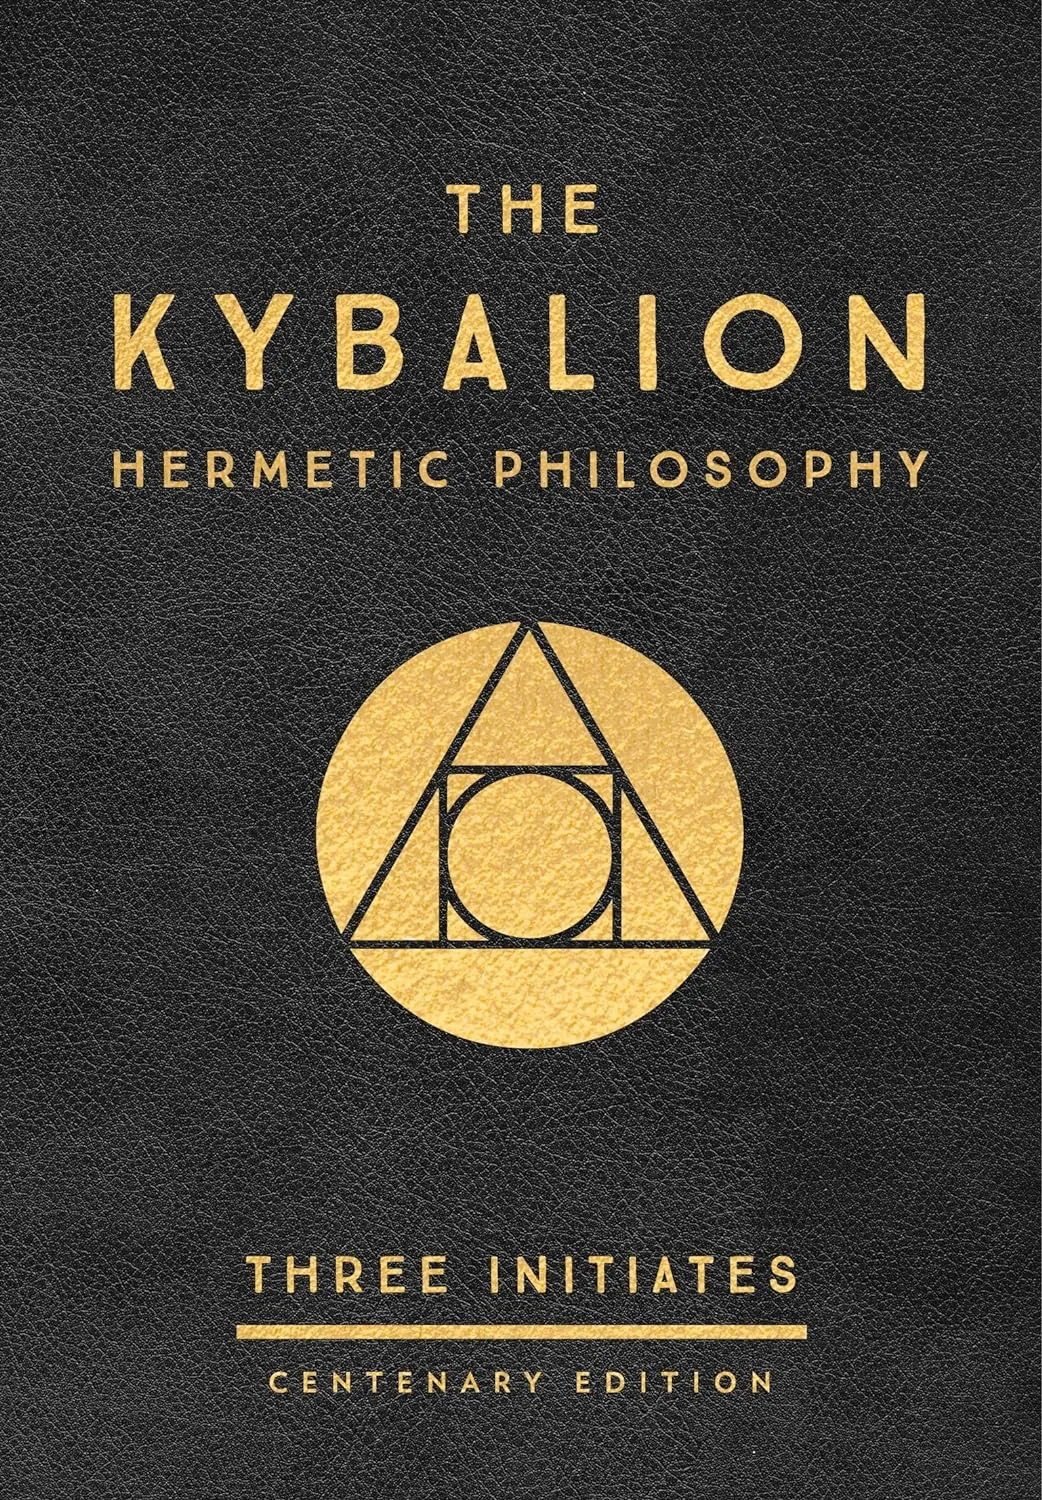 Exploring The Kybalion: A Mystical Journey into the Principles of Hermetic Philosophy